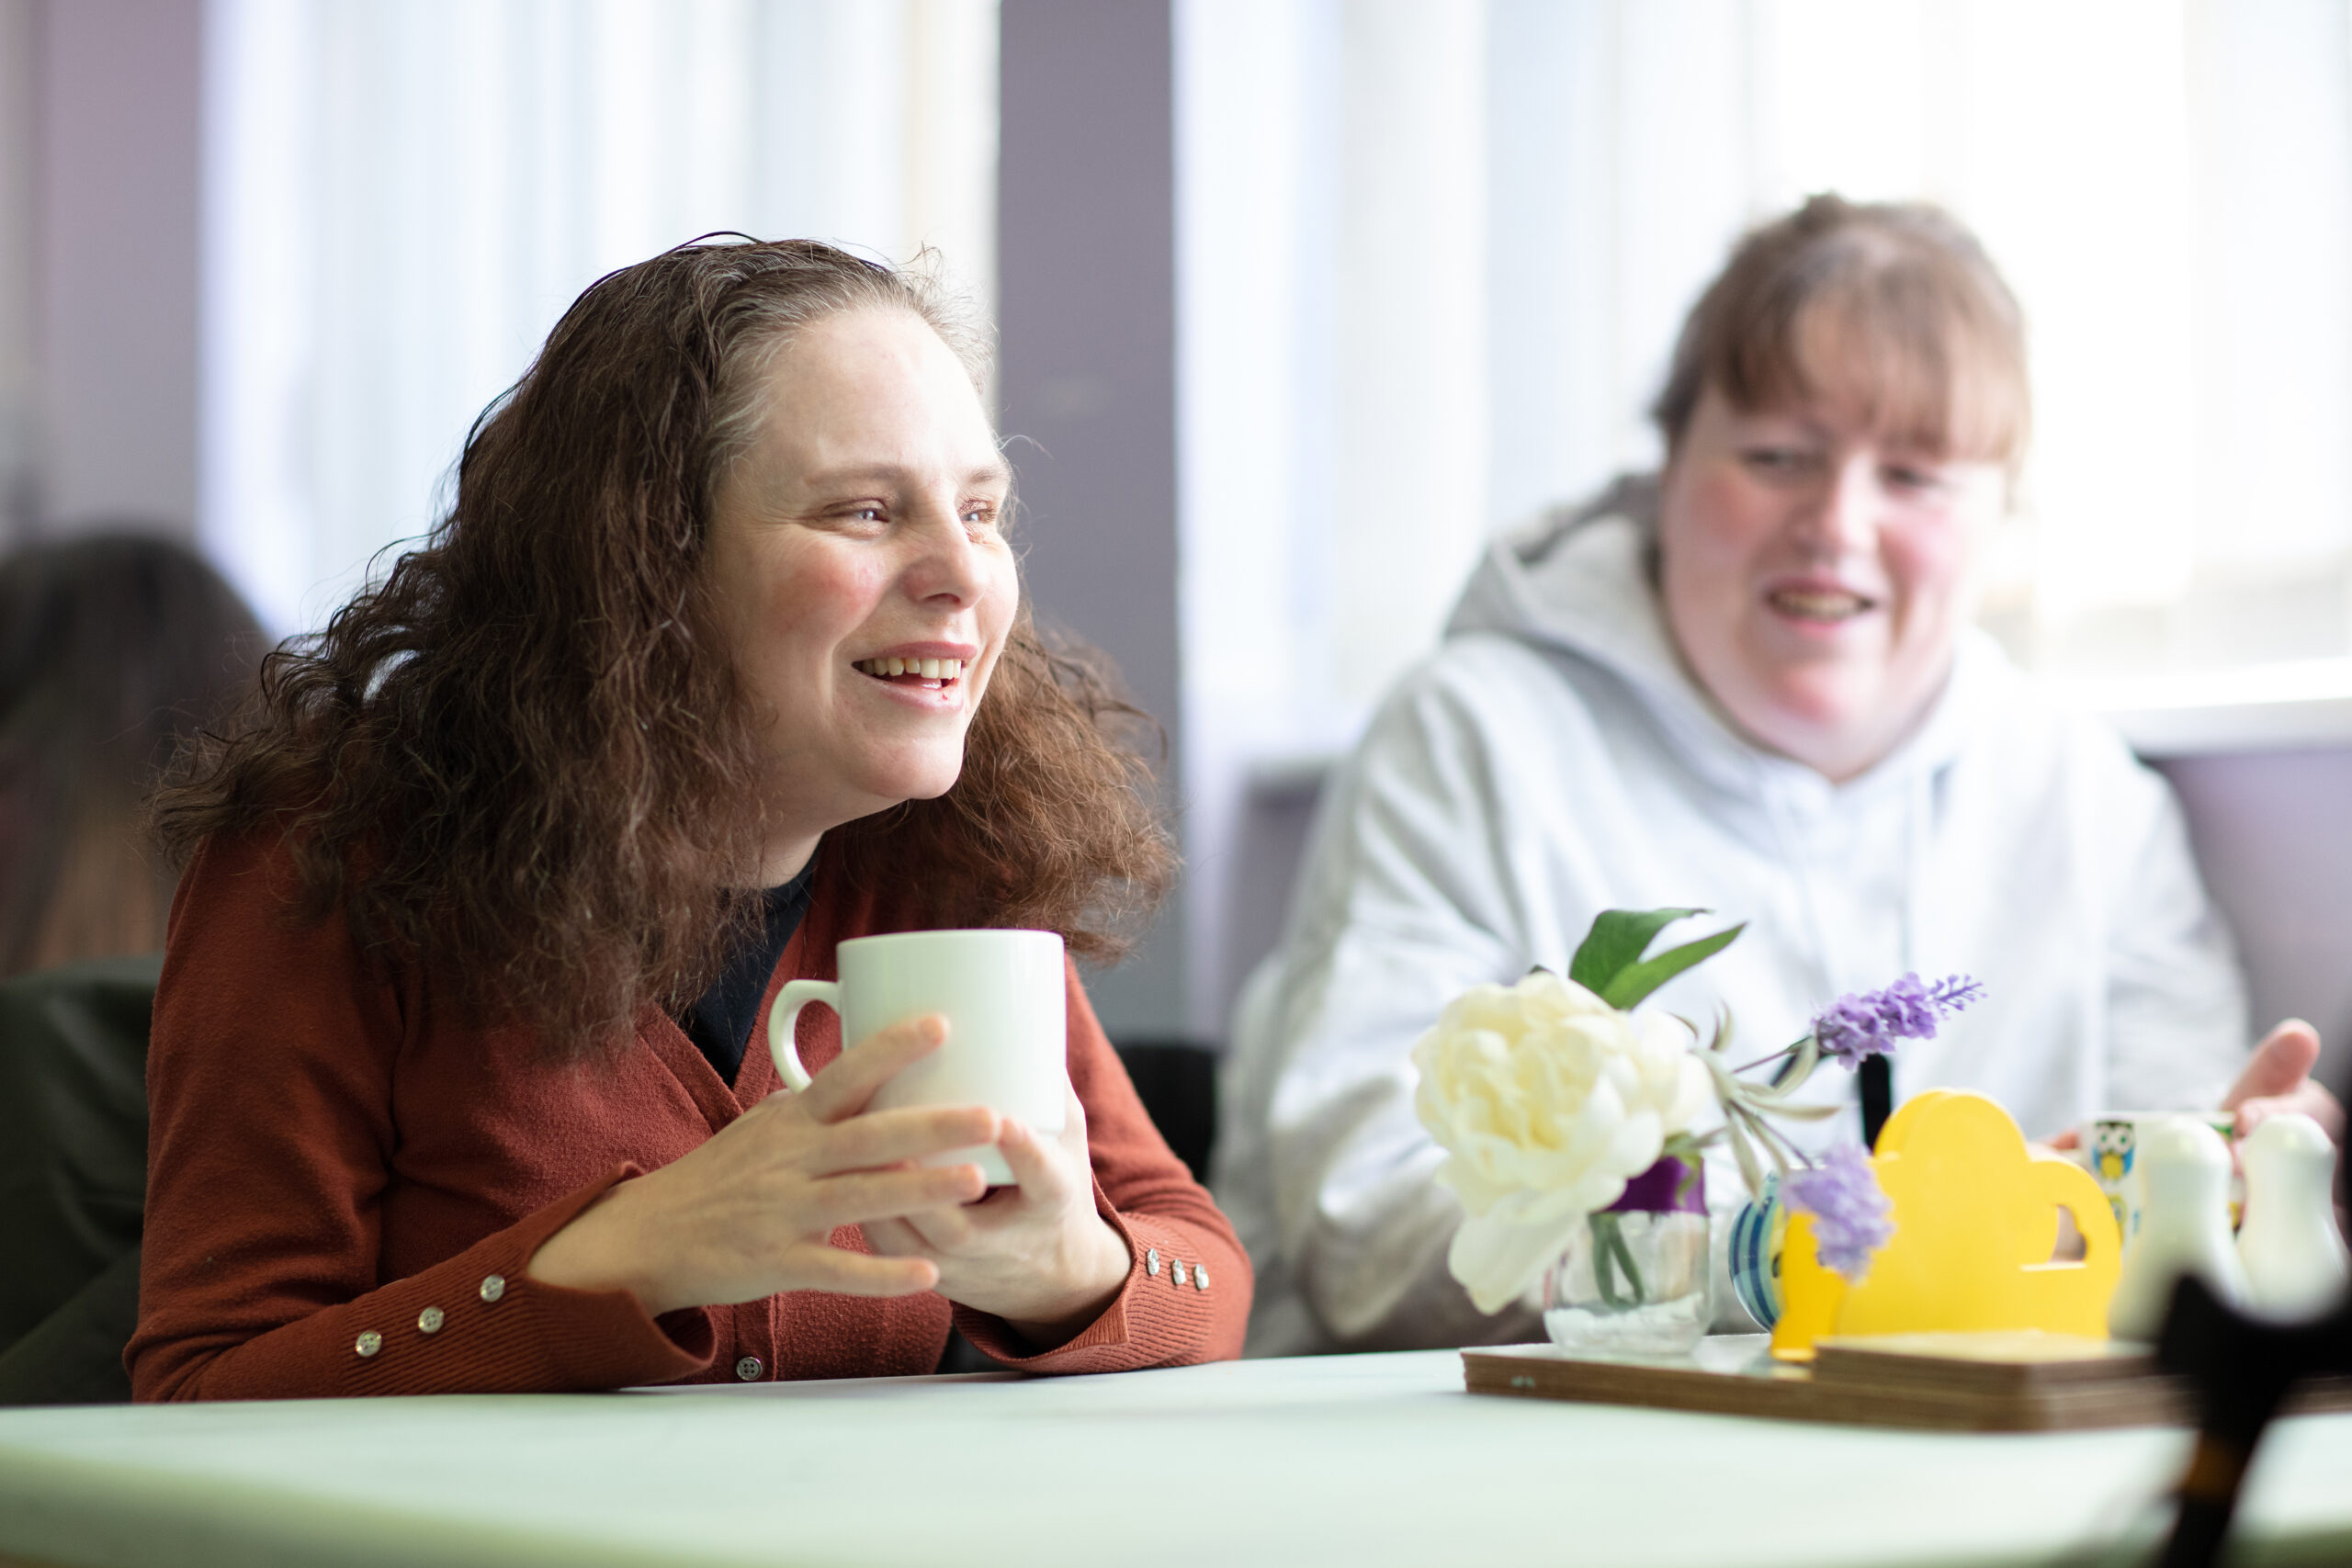 image of two women sitting and having tea who are vision impaired